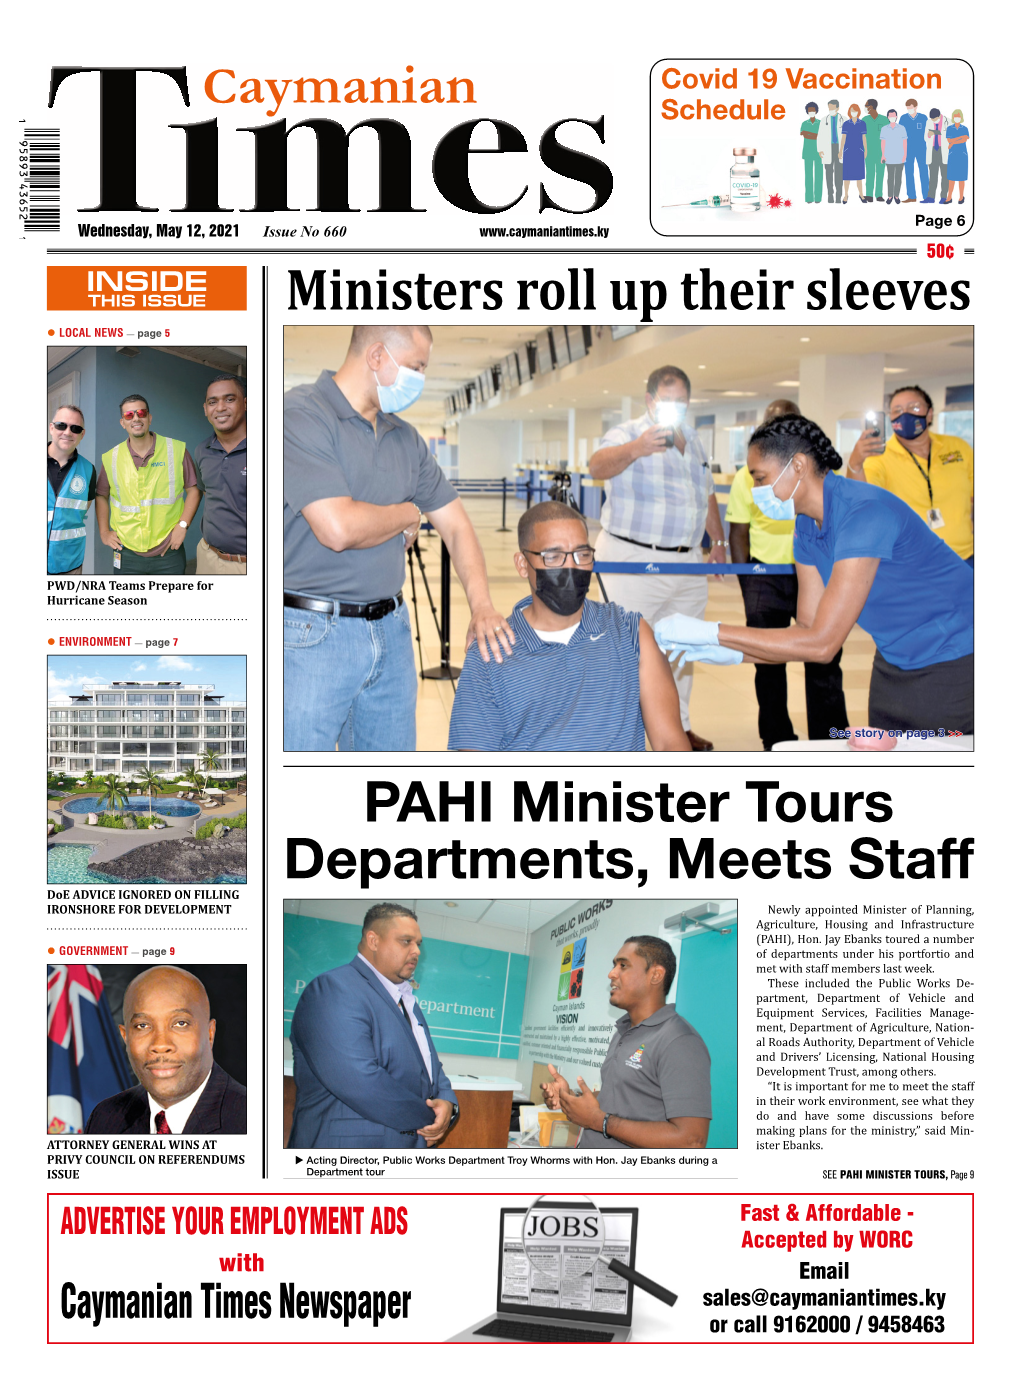 Ministers Roll up Their Sleeves  LOCAL NEWS — Page 5